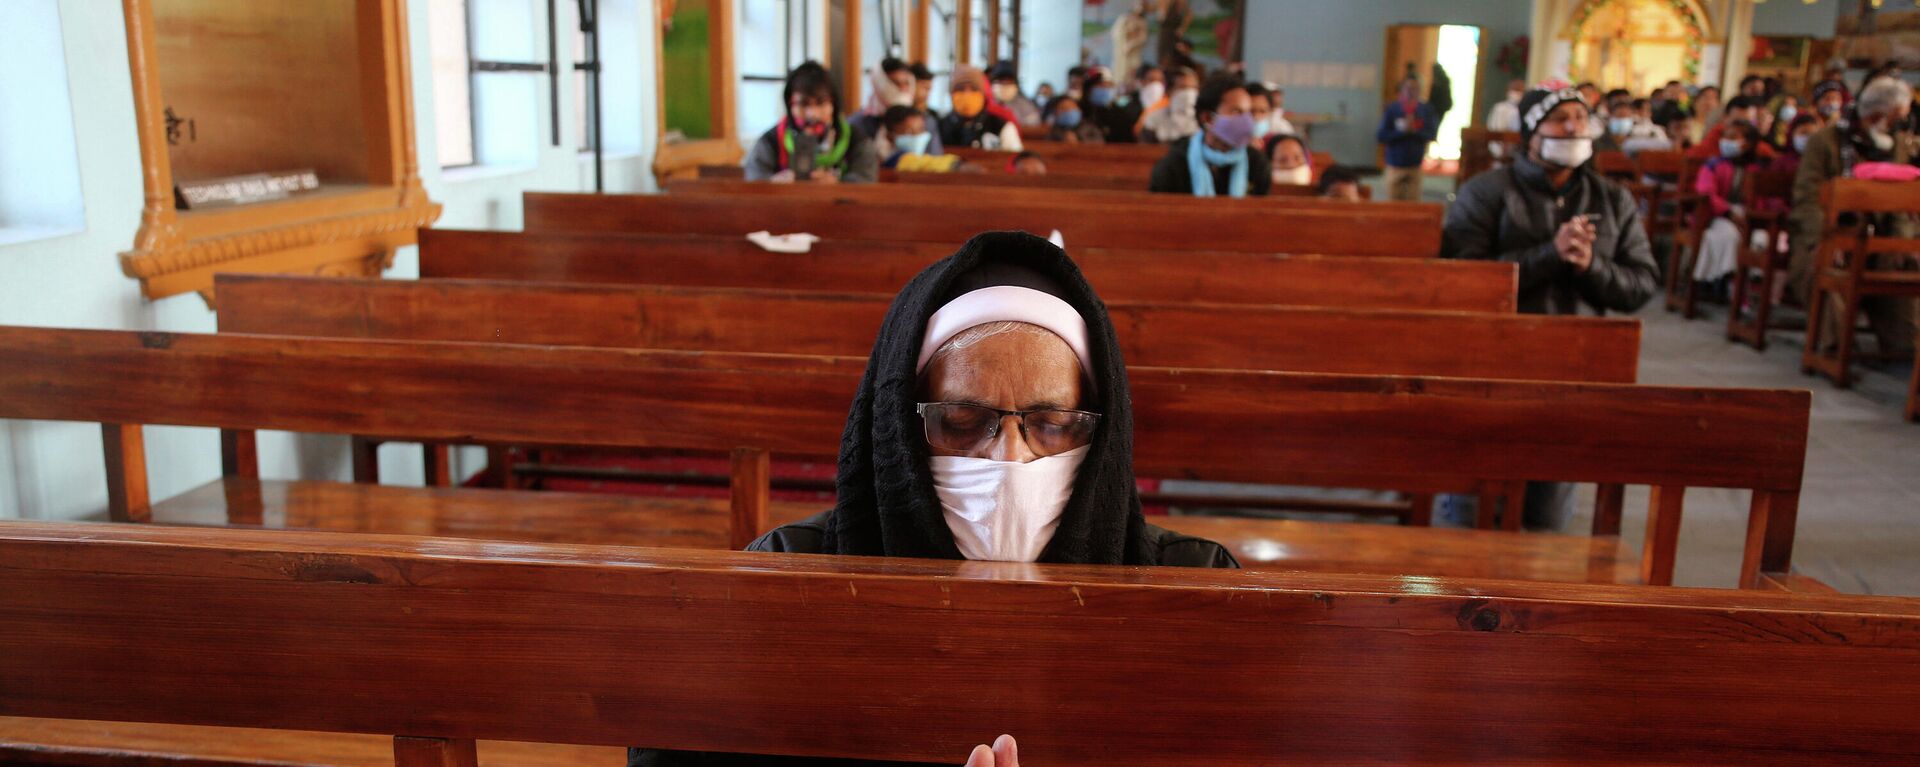 An Indian Christian wearing a face mask as a precaution against the coronavirus prays at Saint Mary's Cathedral on Christmas in Jammu, India, Friday, Dec. 25, 2020 - Sputnik International, 1920, 29.11.2021